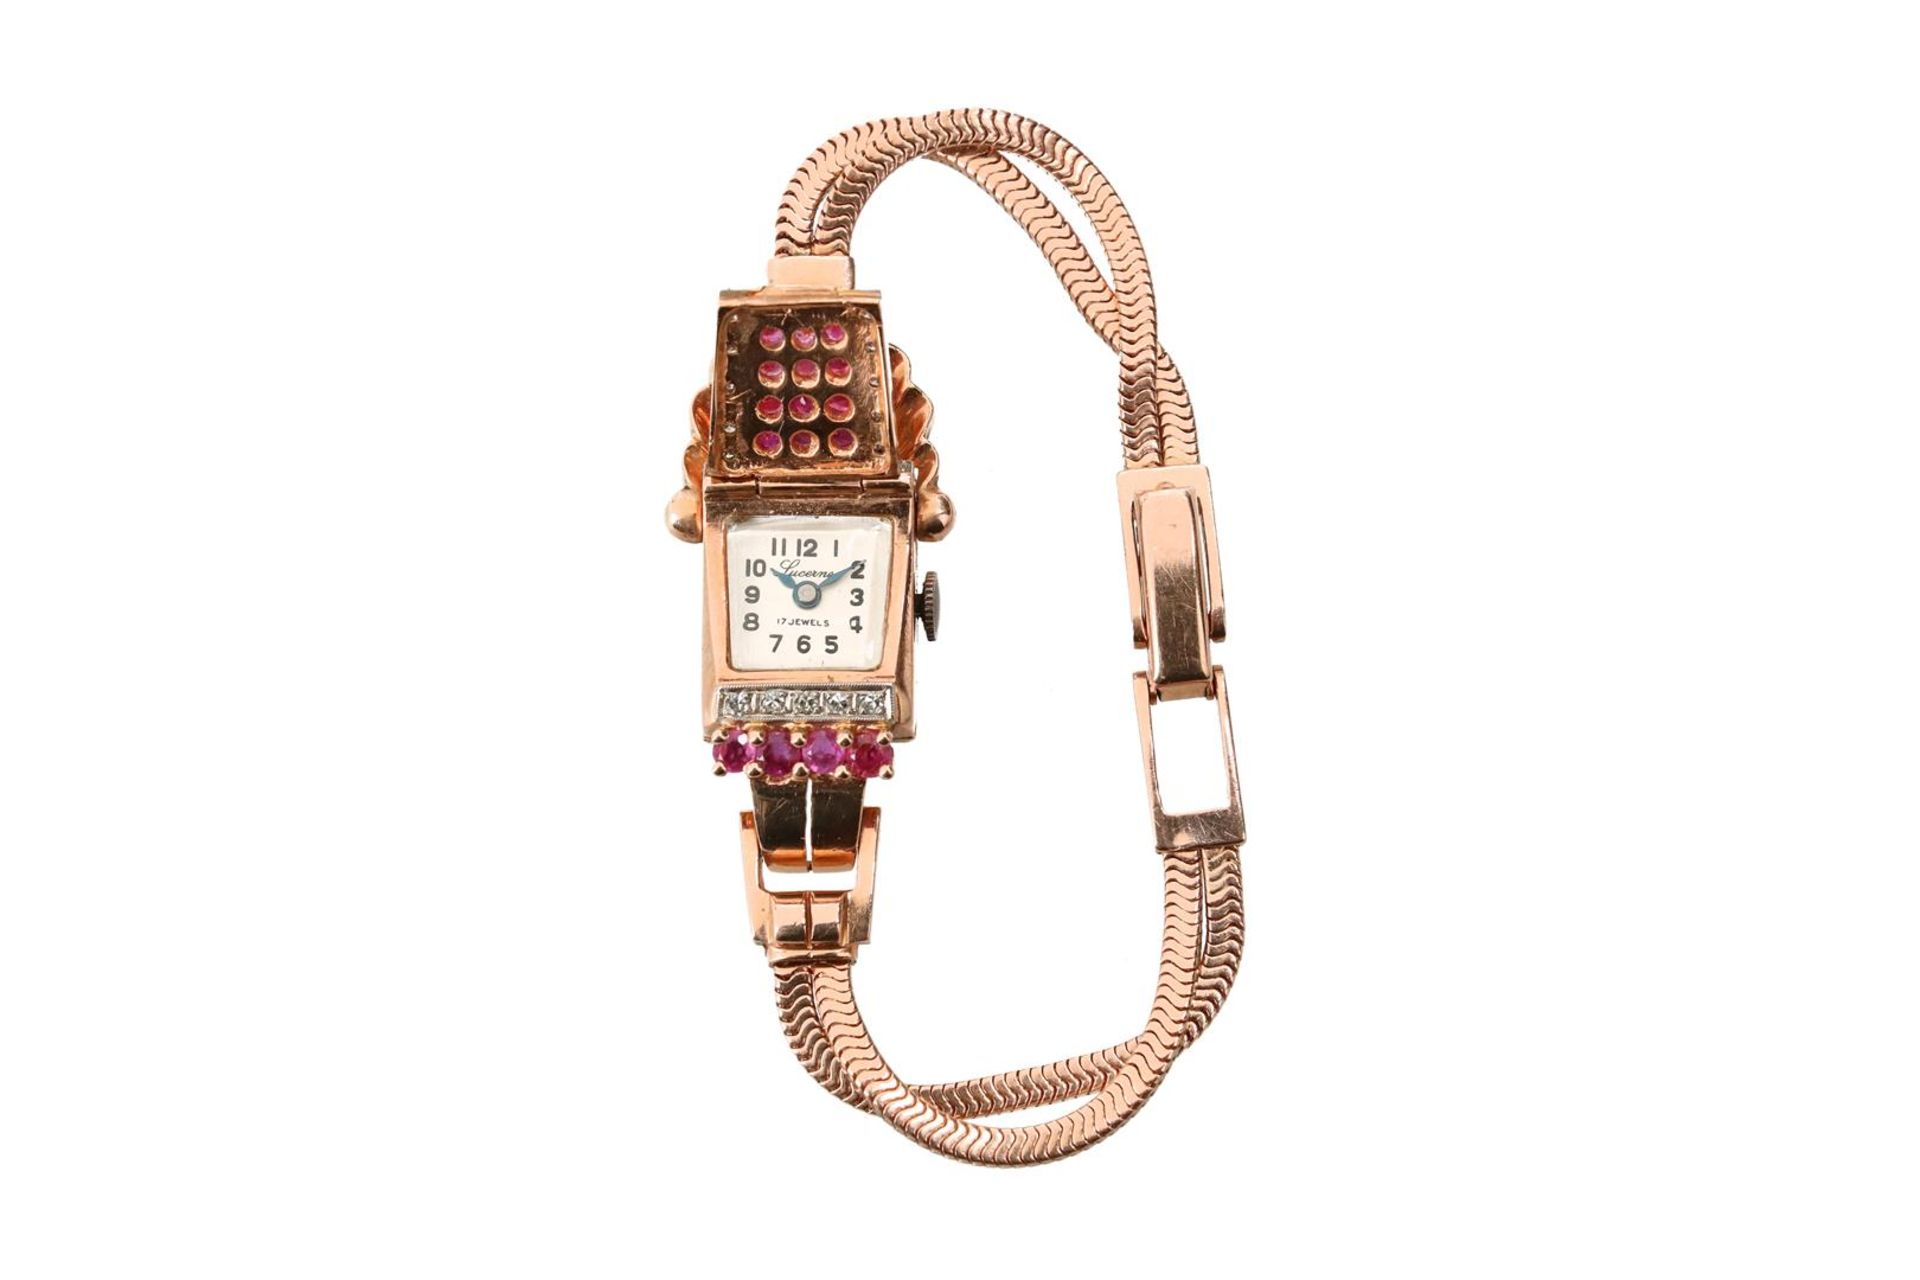 A Lucerne retro 14-kt rose and white gold ladies cocktail watch, set with pink sapphires, in total a - Image 6 of 7